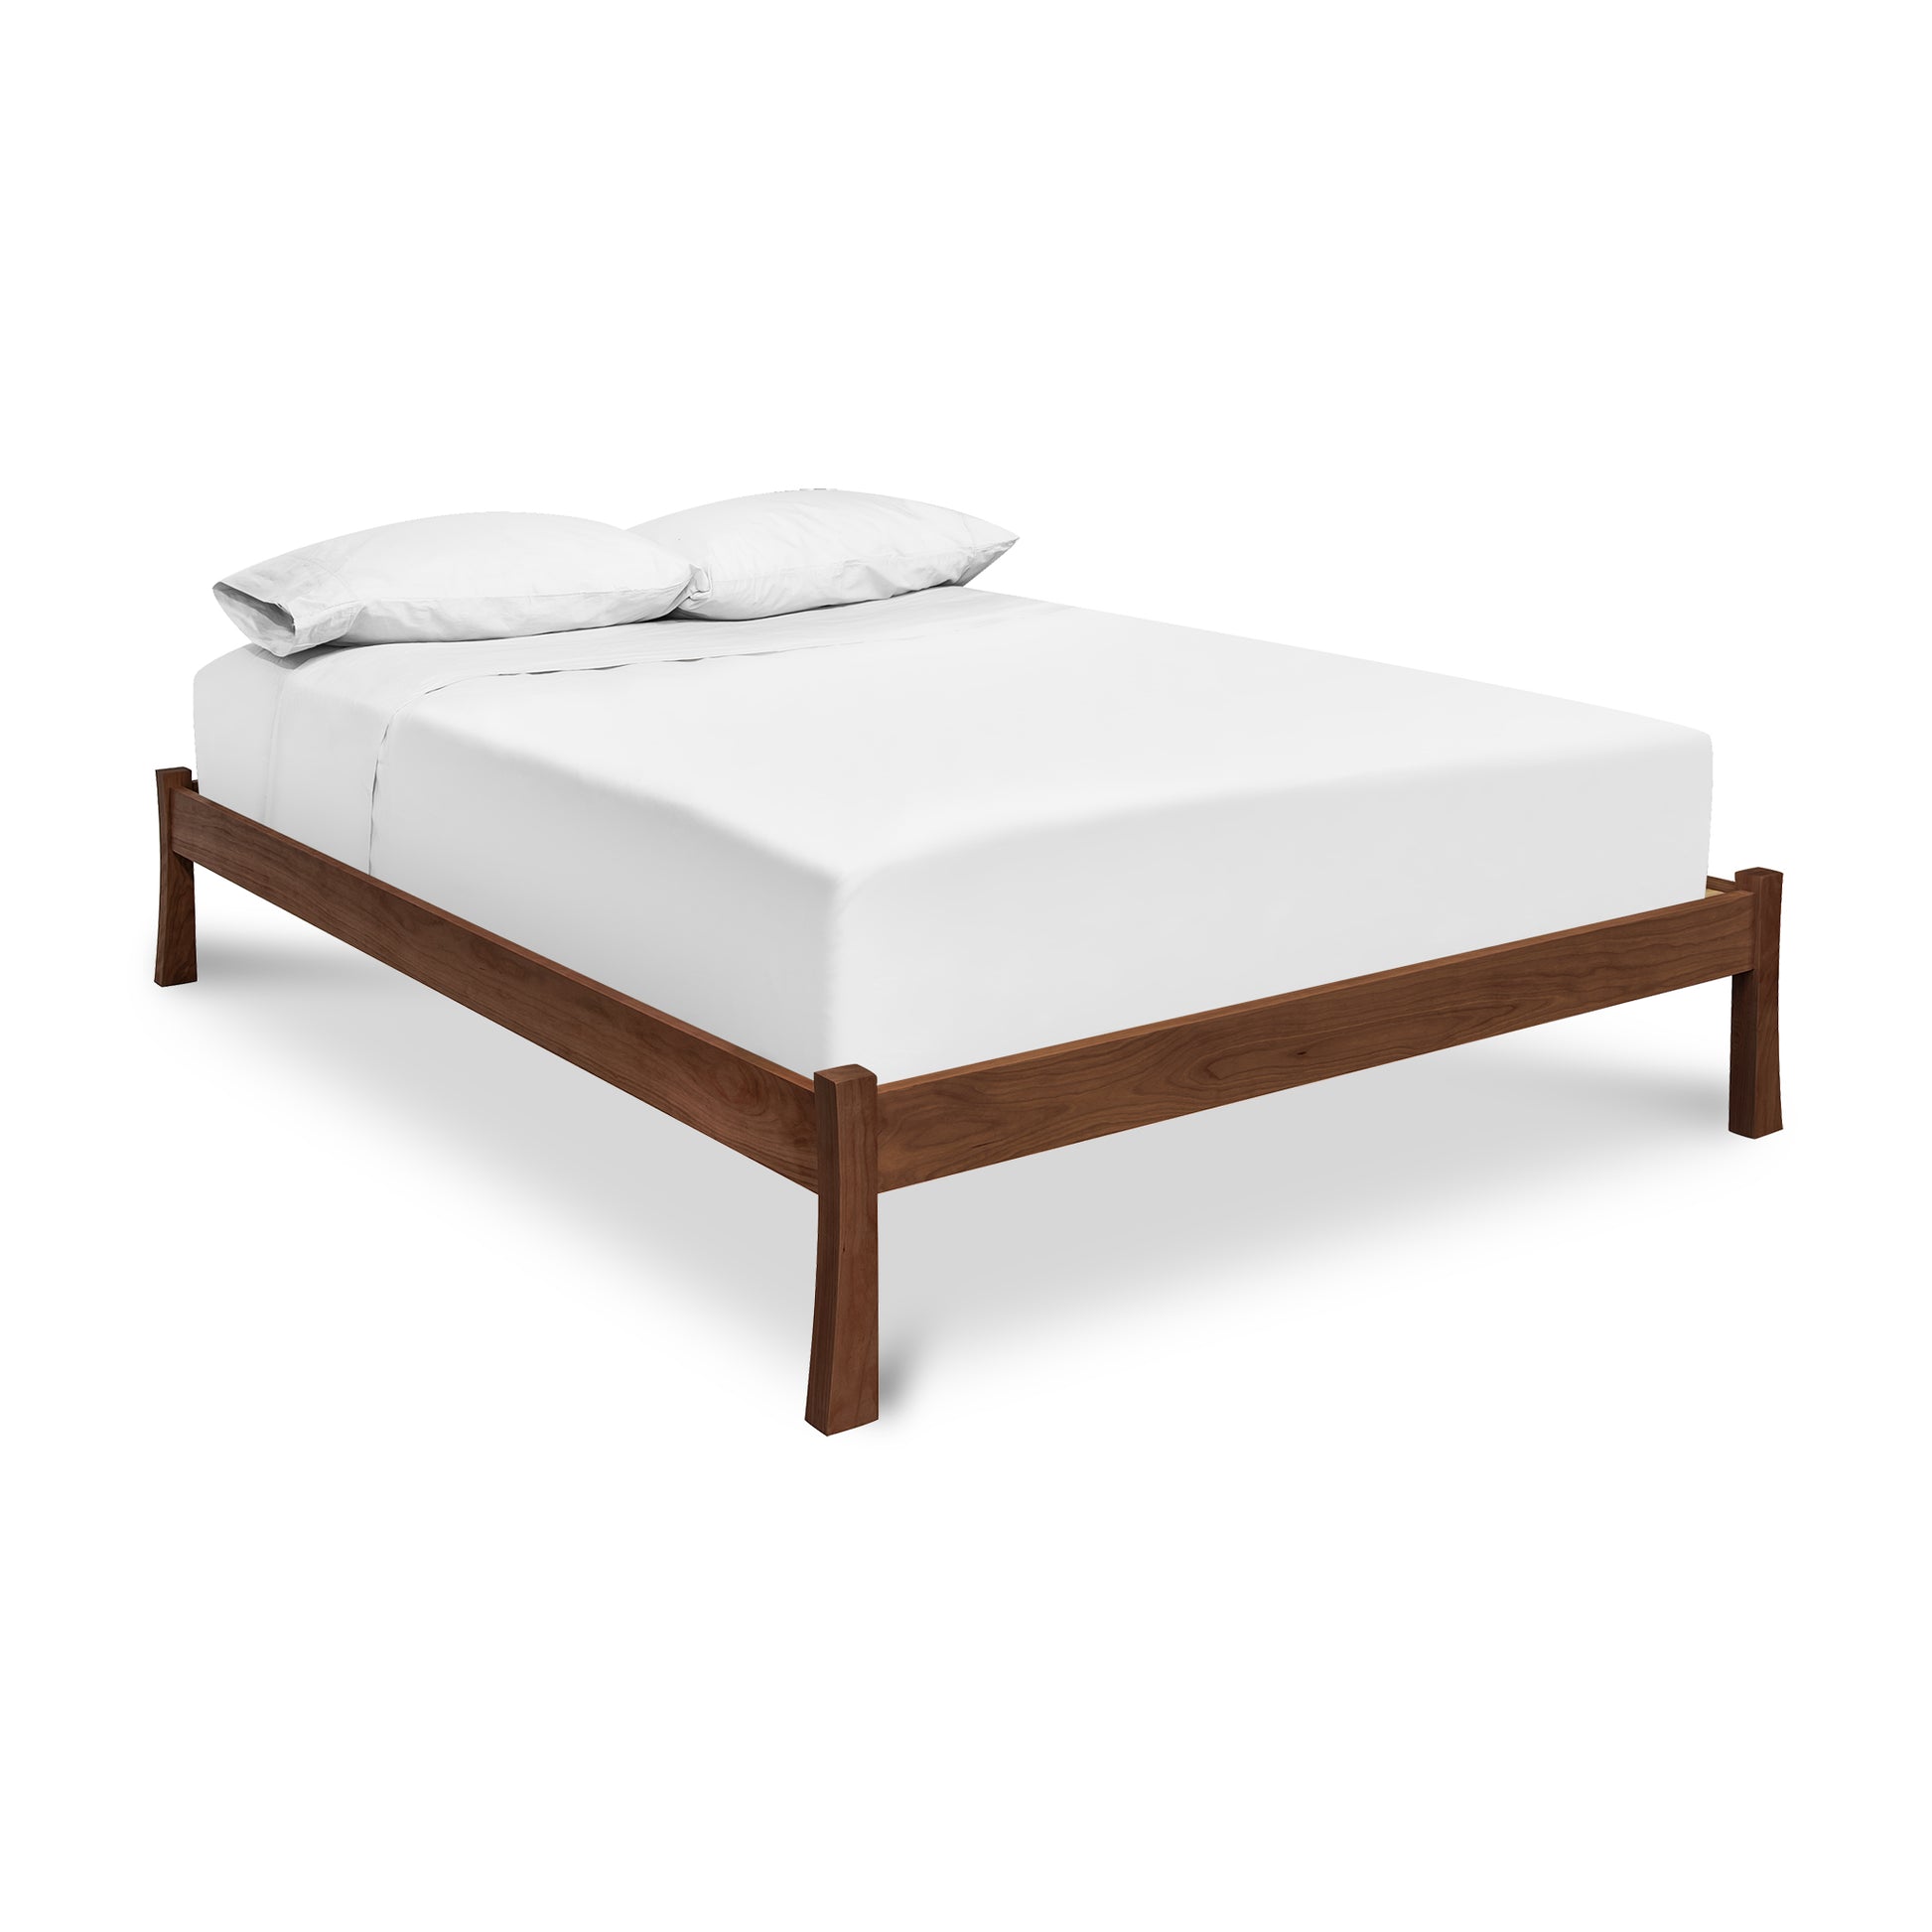 A sustainably sourced Contemporary Craftsman Studio-Style Platform Bed frame from Vermont Furniture Designs with a white mattress and two pillows against a white background.